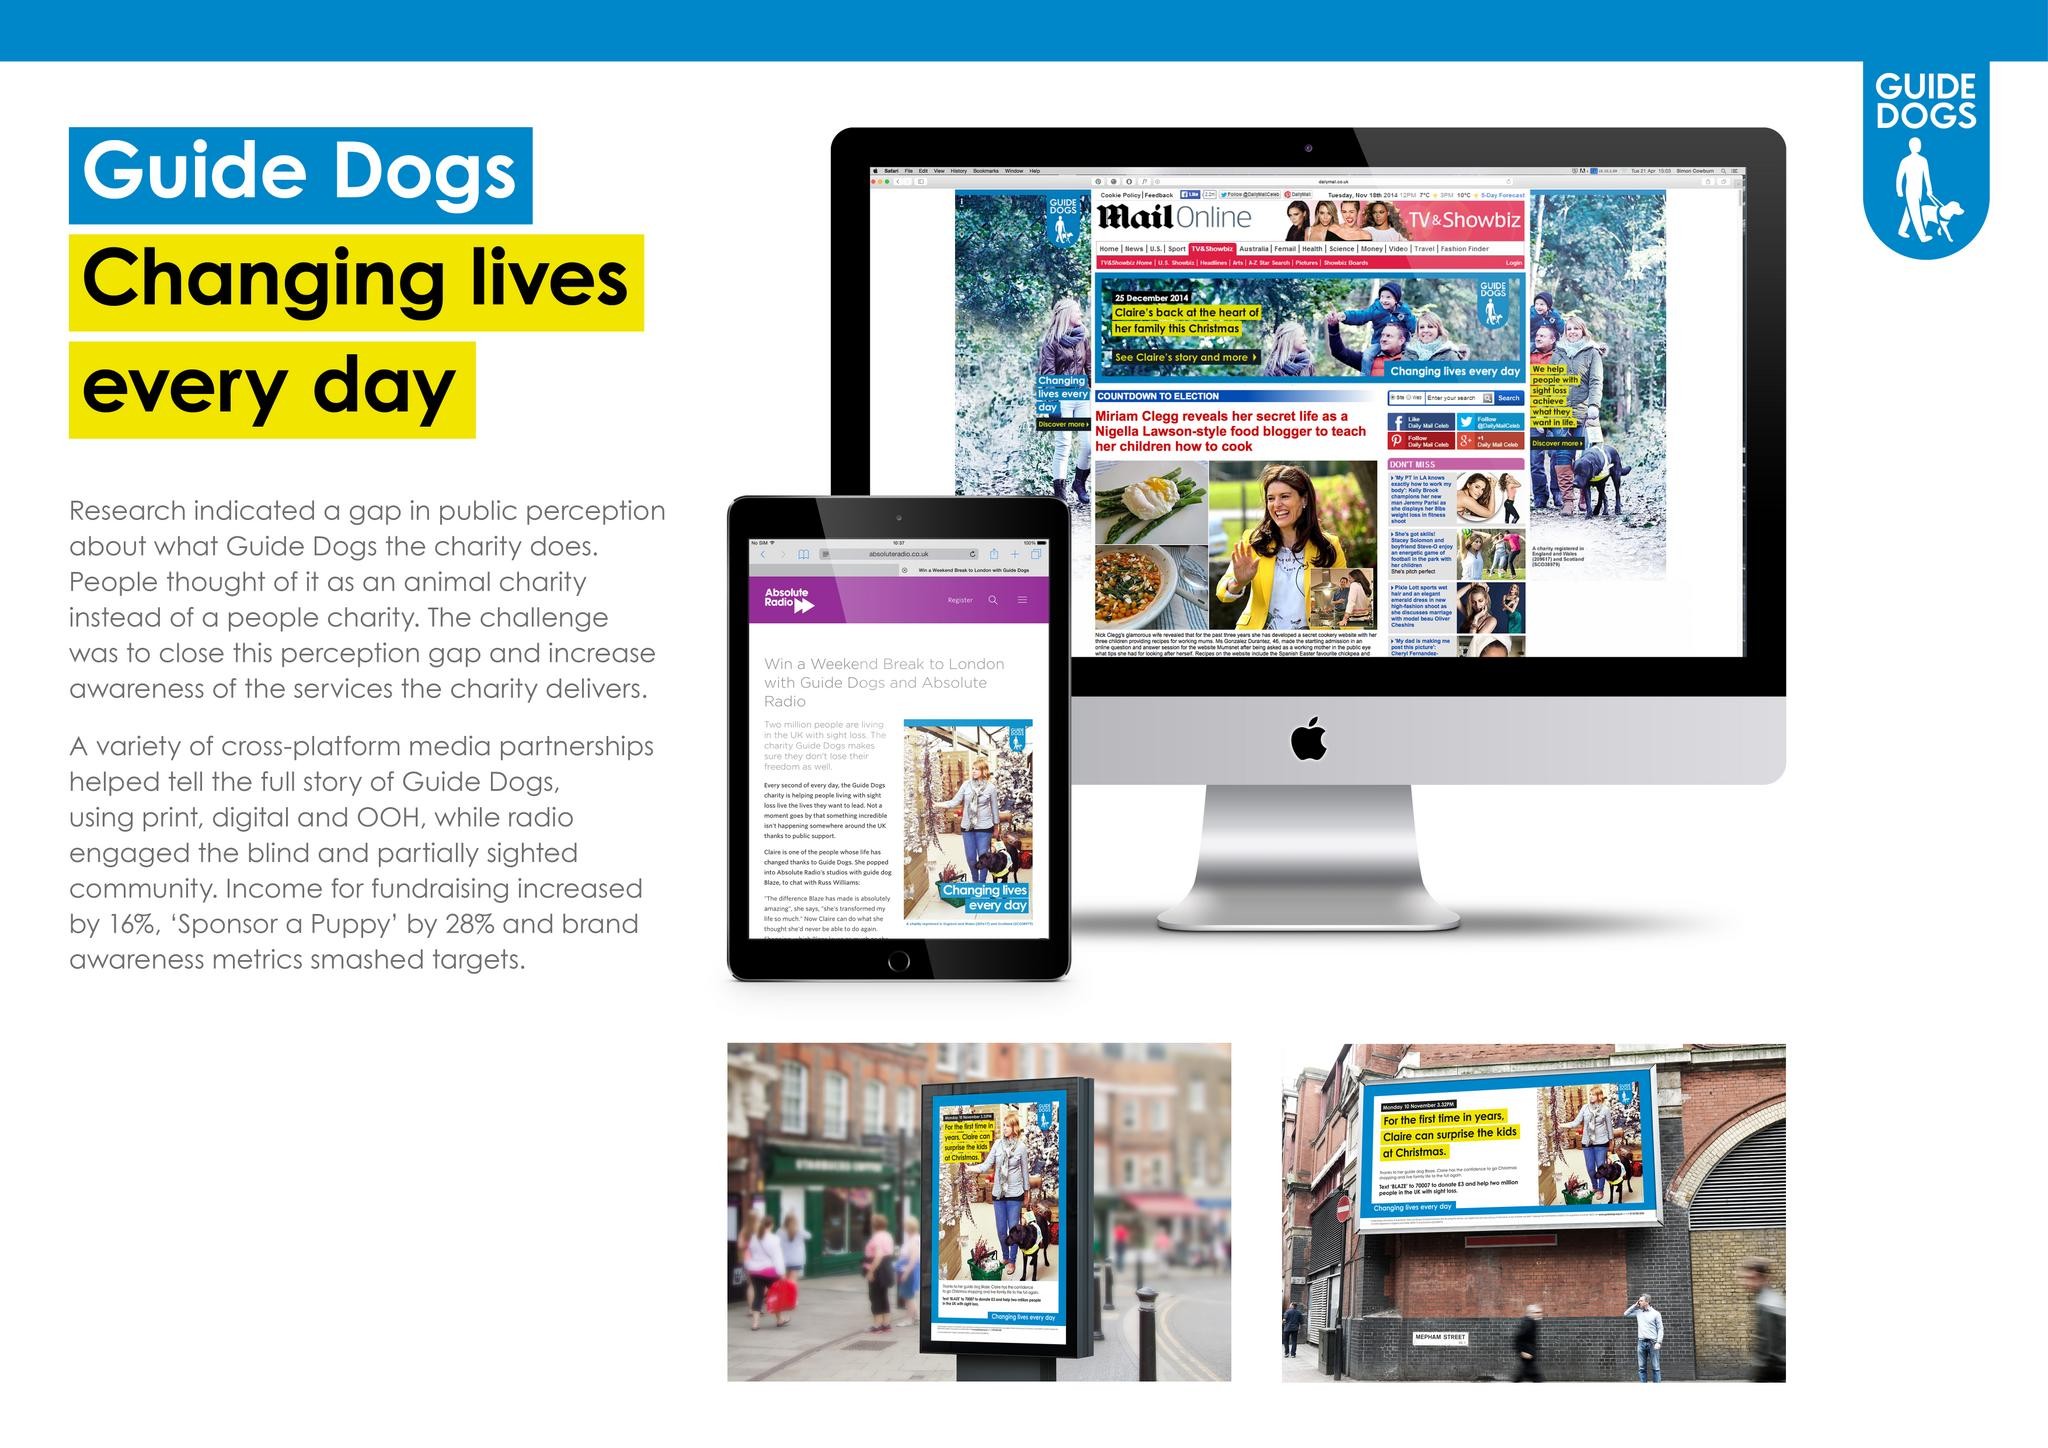 A GREAT “LEAD STORY” – GUIDE DOGS TRANSFORMING LIVES